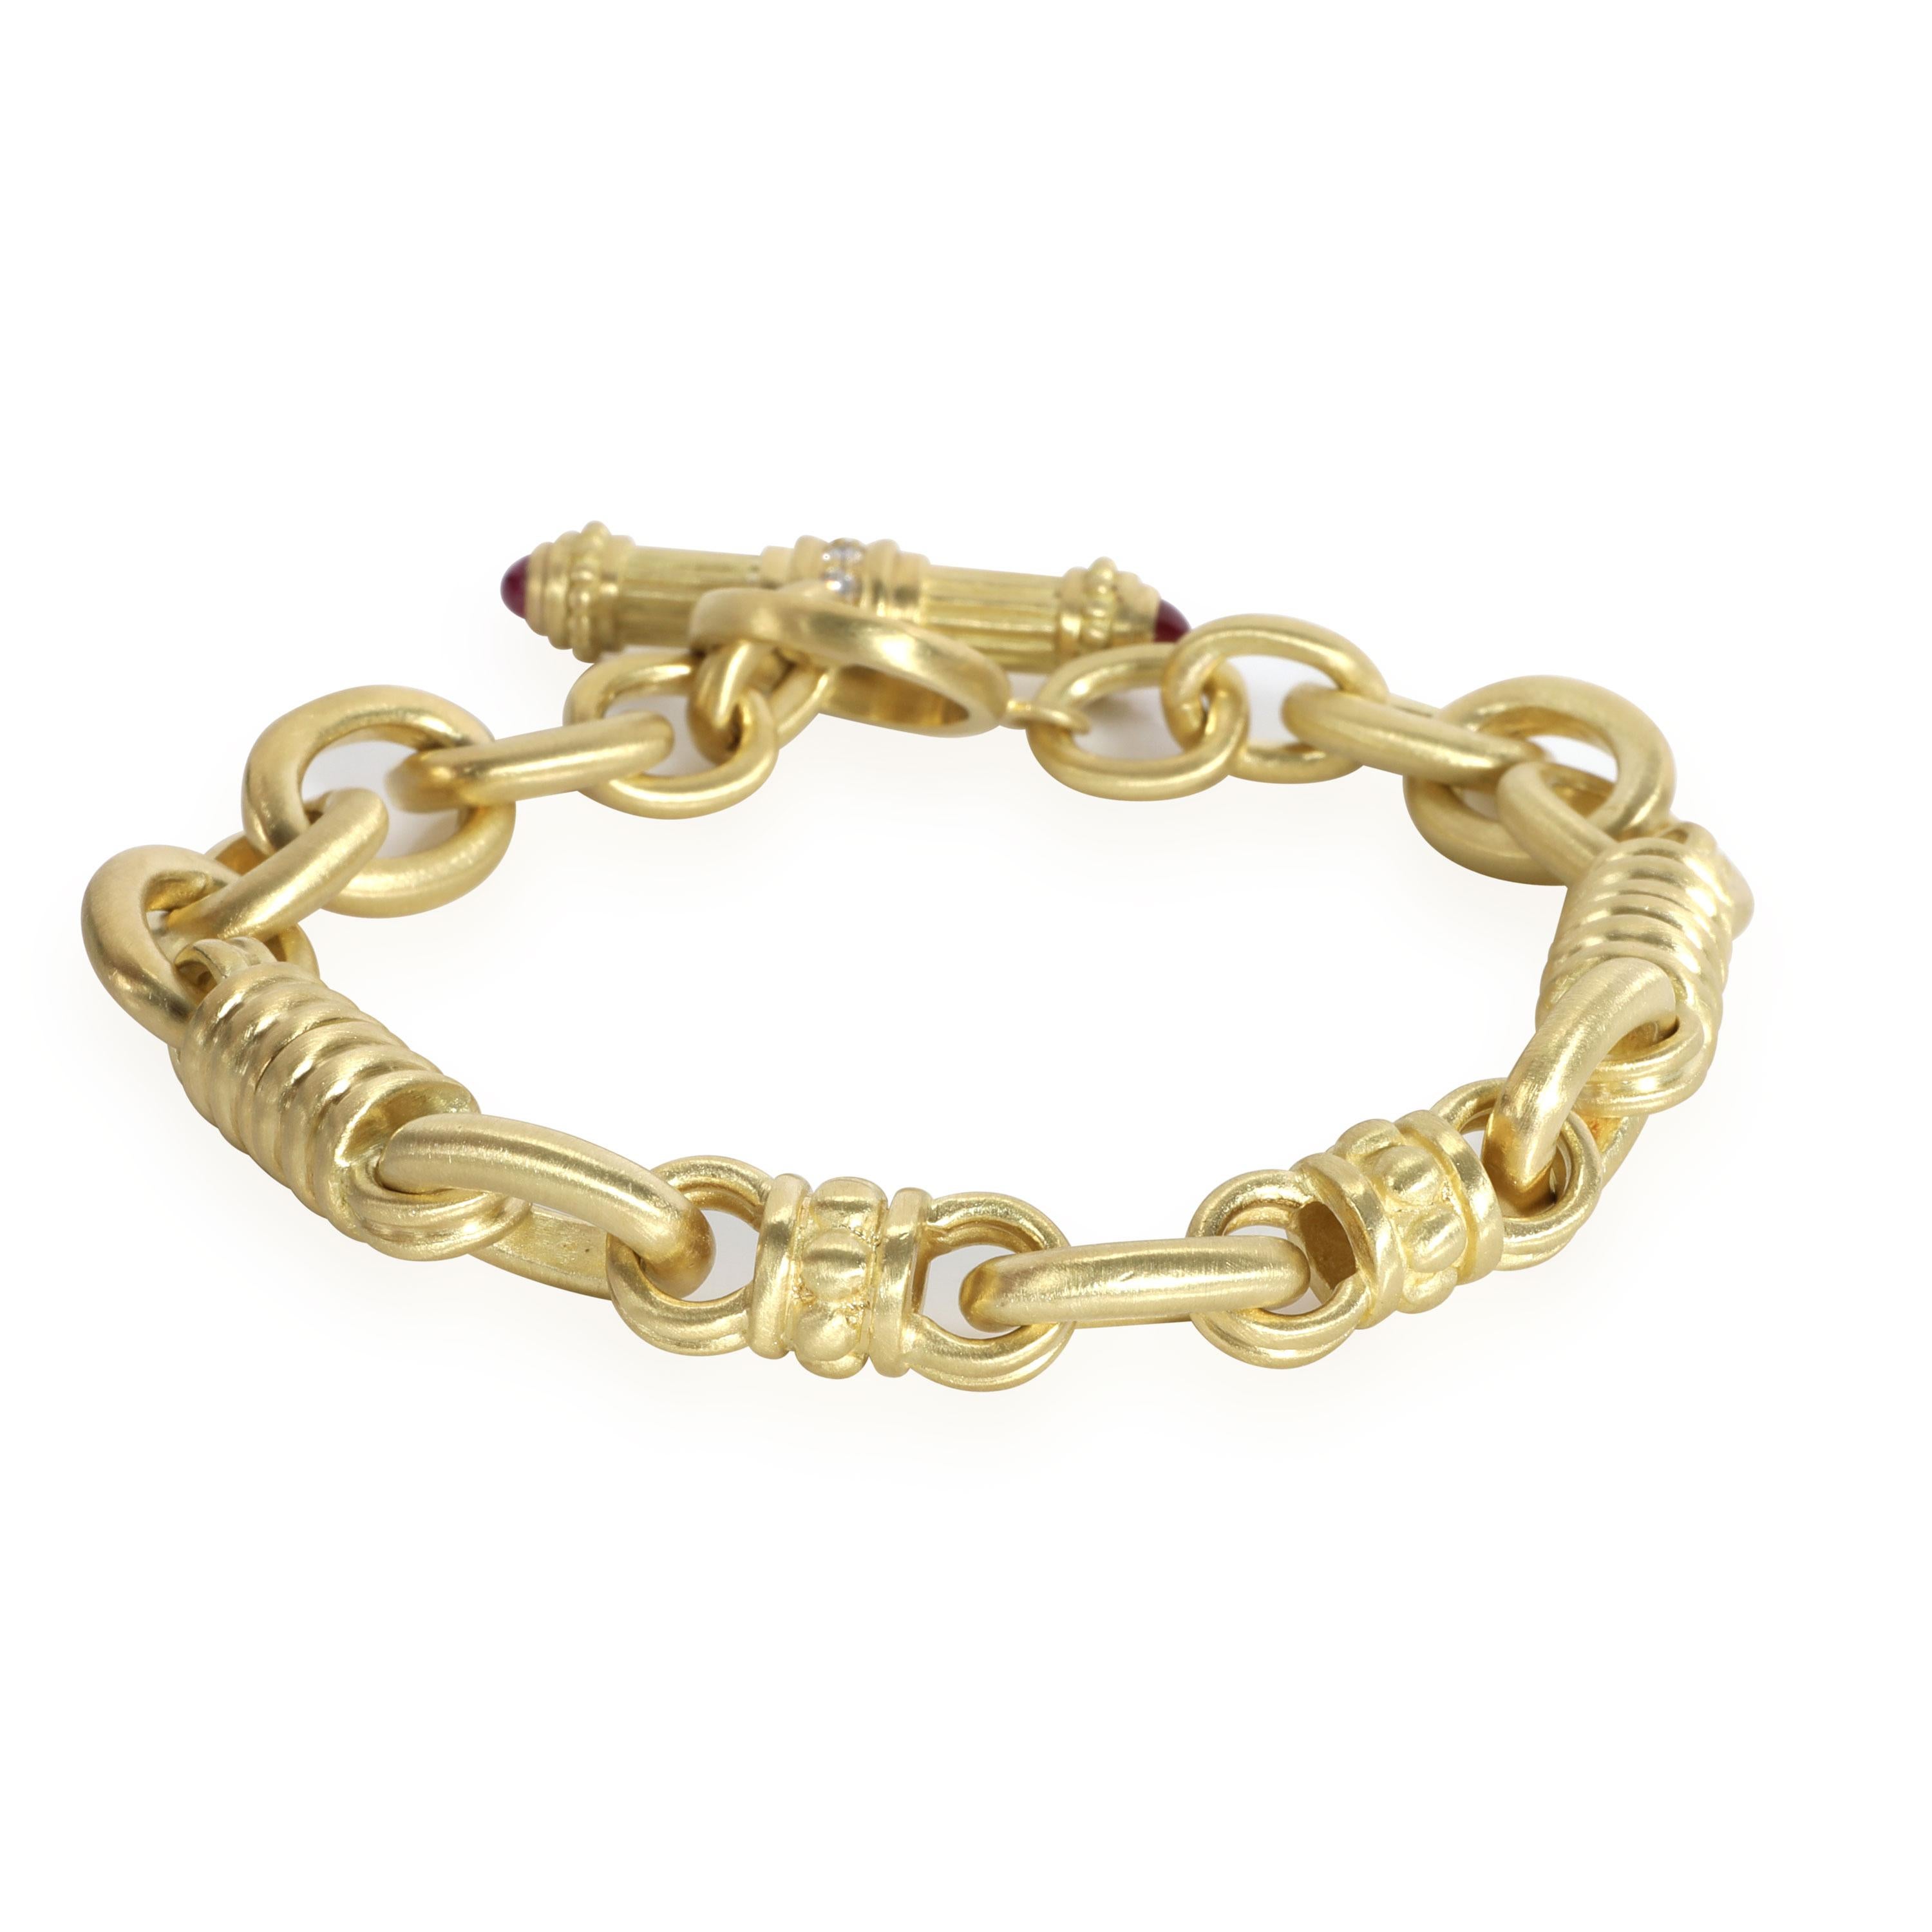 
Judith Ripka Toggle Diamond Bracelet in 18K Yellow Gold 0.25 CTW

PRIMARY DETAILS
SKU: 110351
Listing Title: Judith Ripka Toggle Diamond Bracelet in 18K Yellow Gold 0.25 CTW
Condition Description: Retails for 15000 USD. In excellent condition and